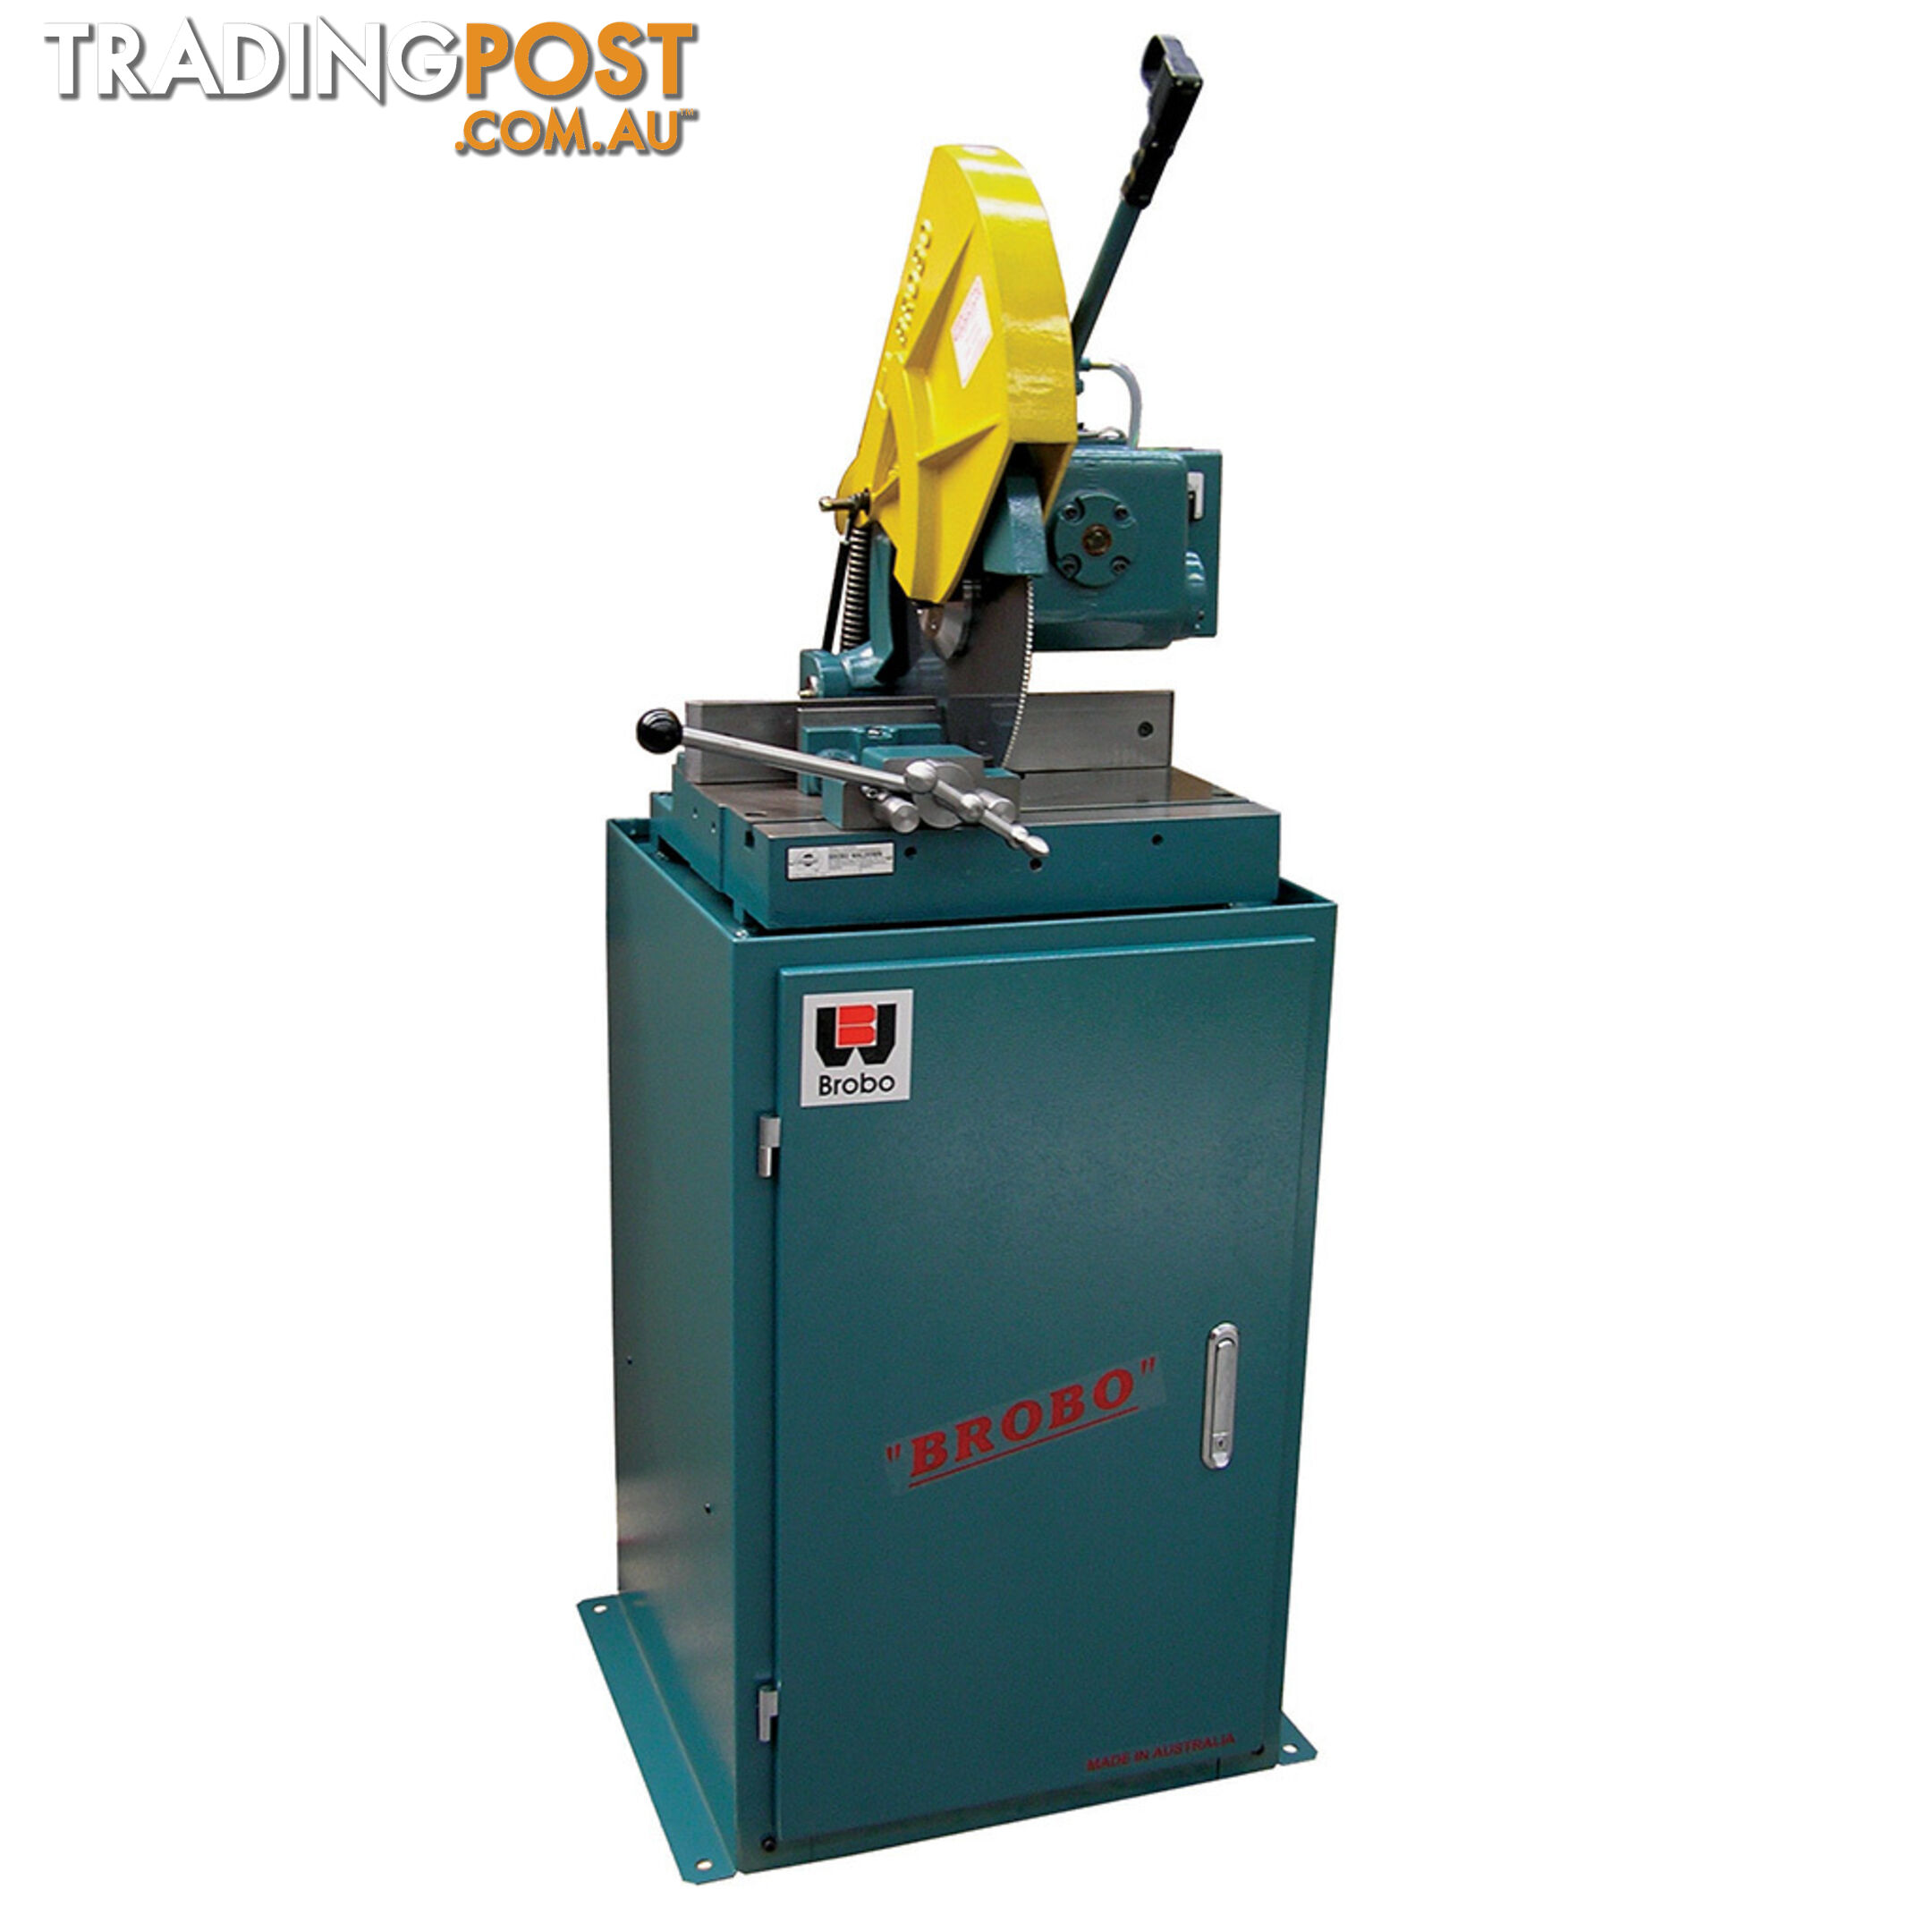 Ferrous Cutting Cold Saw S350G Single Phase Vari Speed (20-100 RPM) Integrated Stand Brobo 9730040